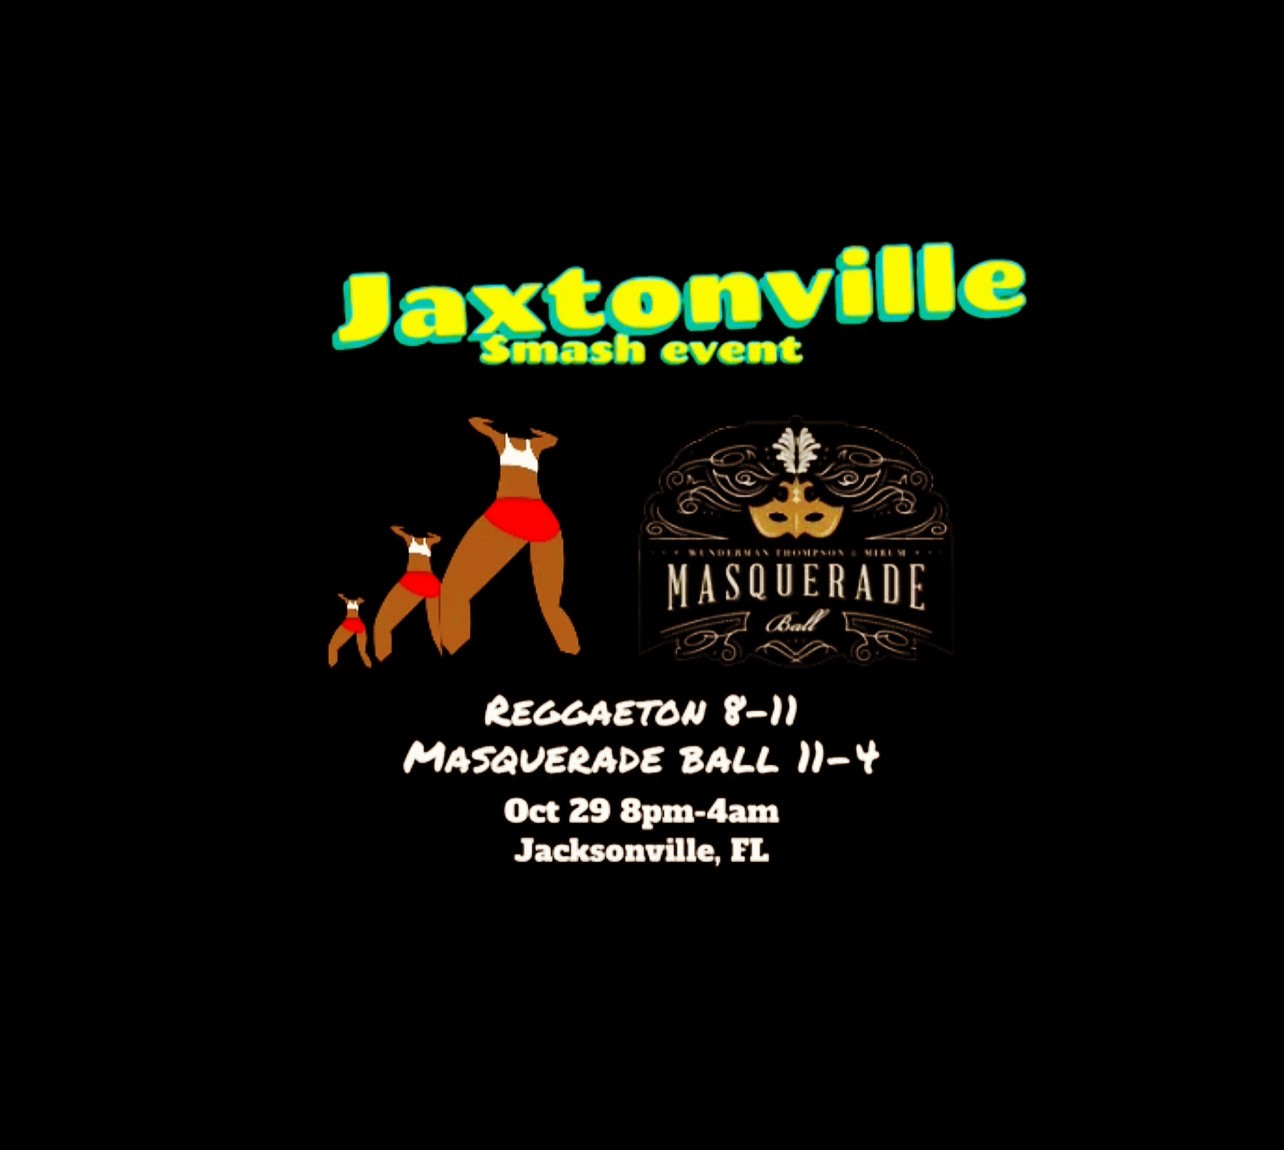 Jaxtonville Smash Event on Oct 29, 20:00@Clubhouse - Buy tickets and Get information on www.jaxtonville.com 